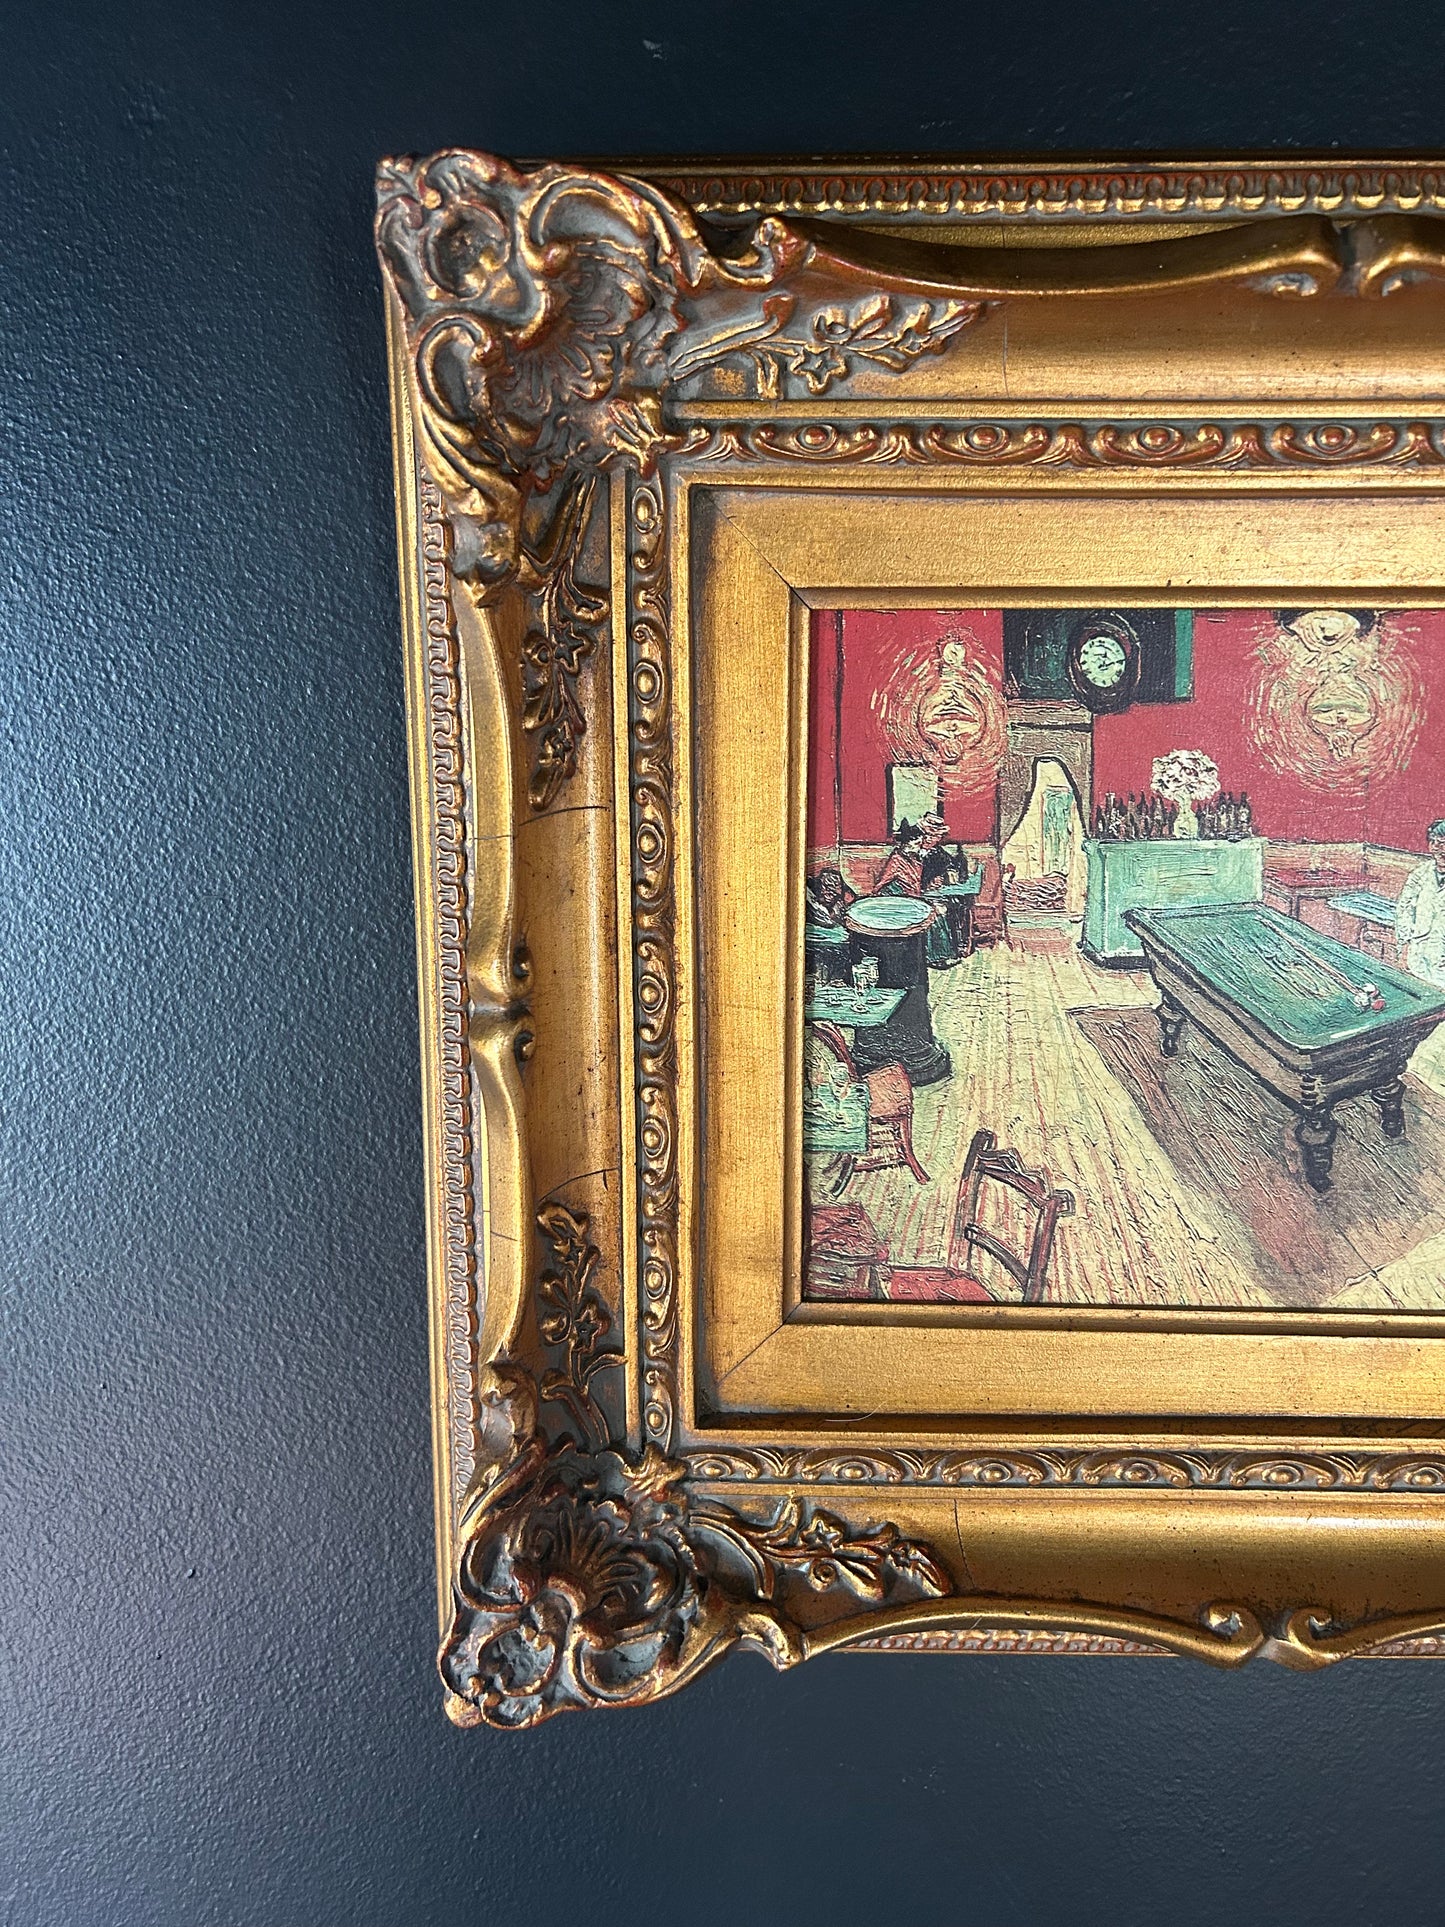 Van Gogh 'Night Cafe' reproduction with gilded frame